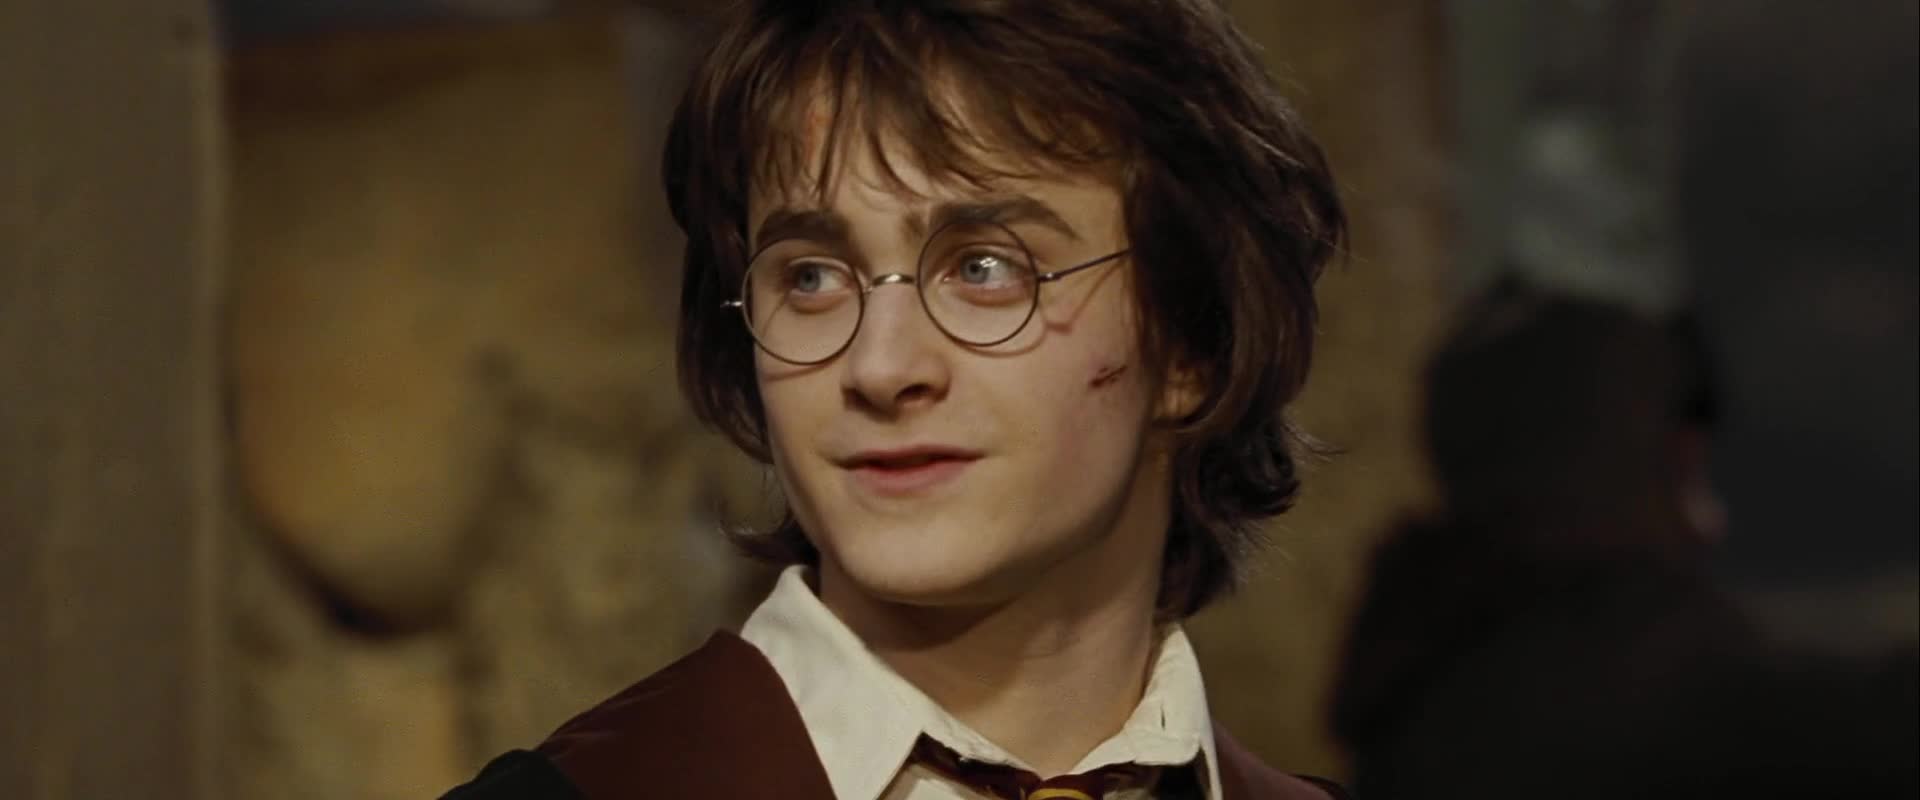 Harry Potter And The Goblet Of Fire 2005 1080p BluRay H264 AAC RARBG TGx